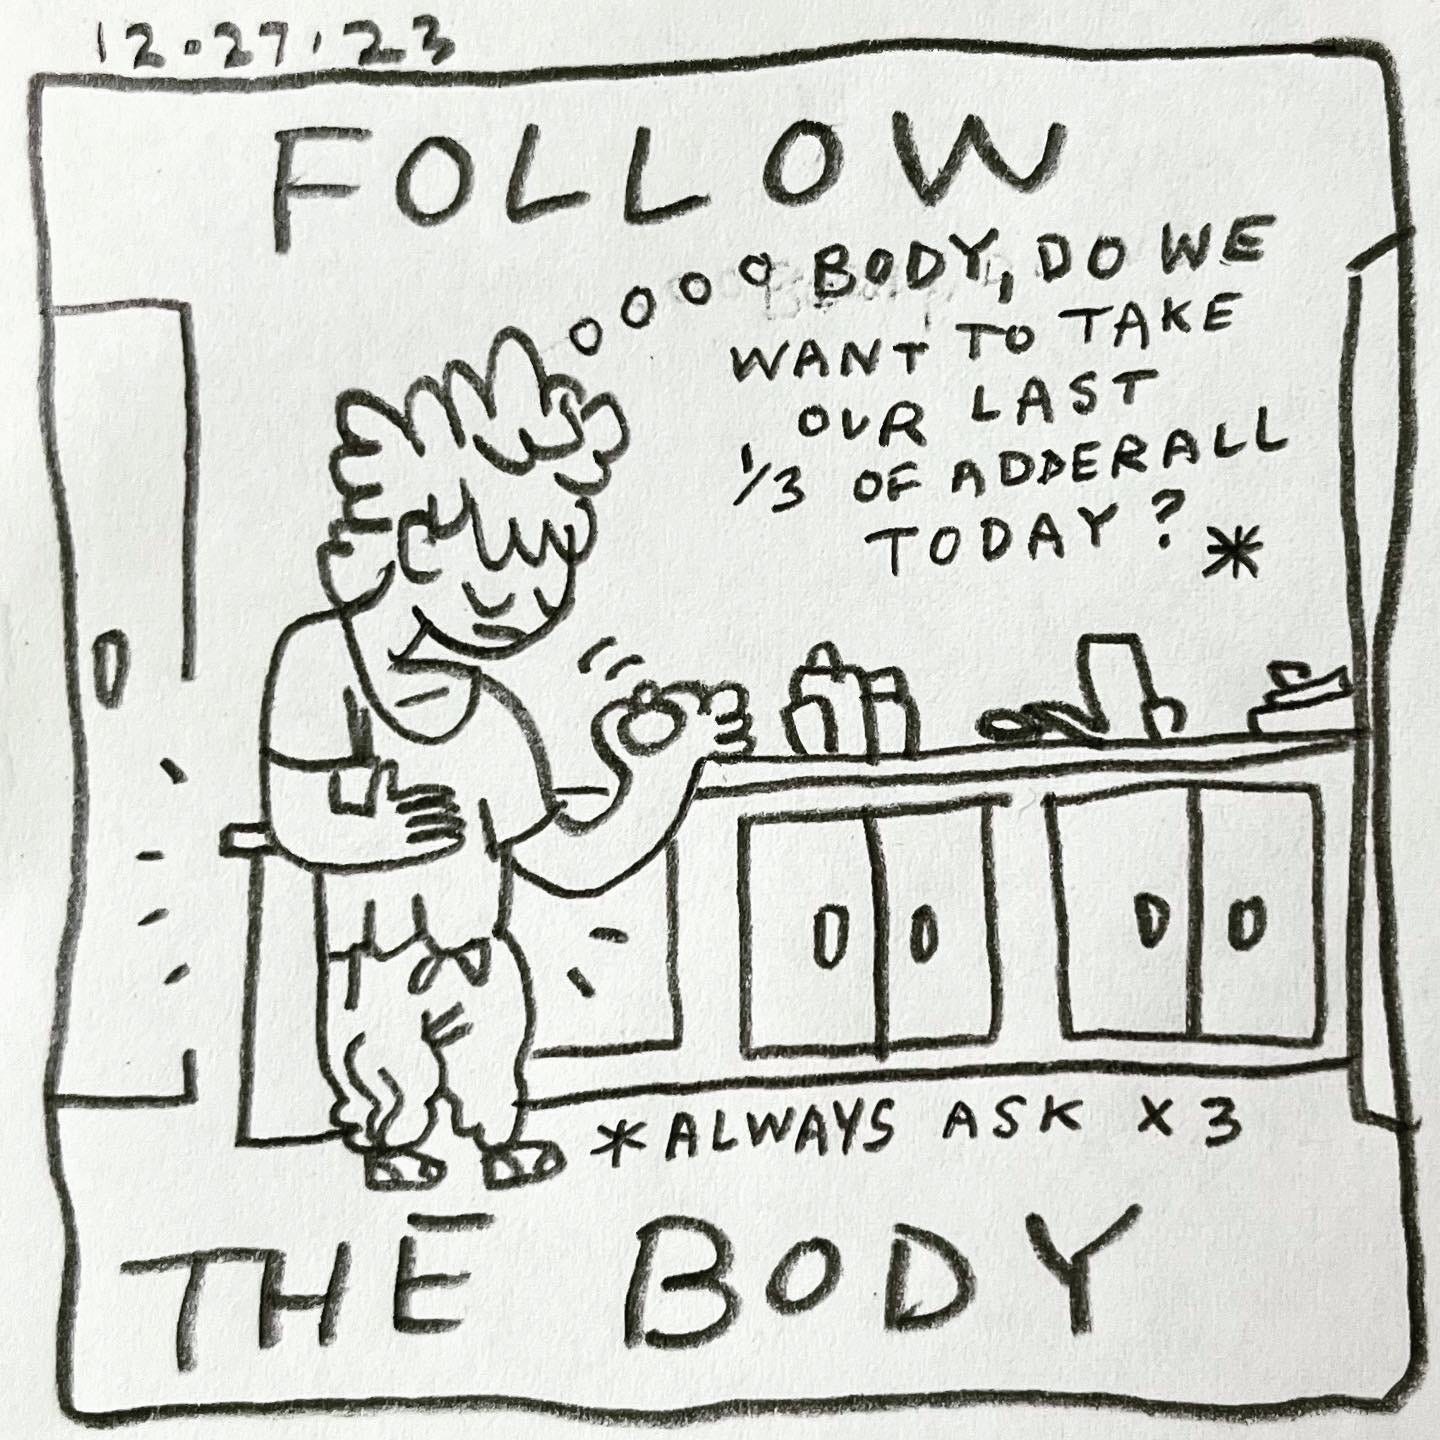 Panel 1: follow the body Image: Lark is standing in the kitchen wearing sweatpants, socks and a t-shirt, with their hand on their stomach. Their other hand is holding a pill up to their face, eyes closed. A counter with cabinets and small items is in the background. Lark is vibing with the pill, thinking "body, do we want to take our last 1/3 of Adderall today?"* At the bottom of the panel, another asterisk reads, "always ask x3"